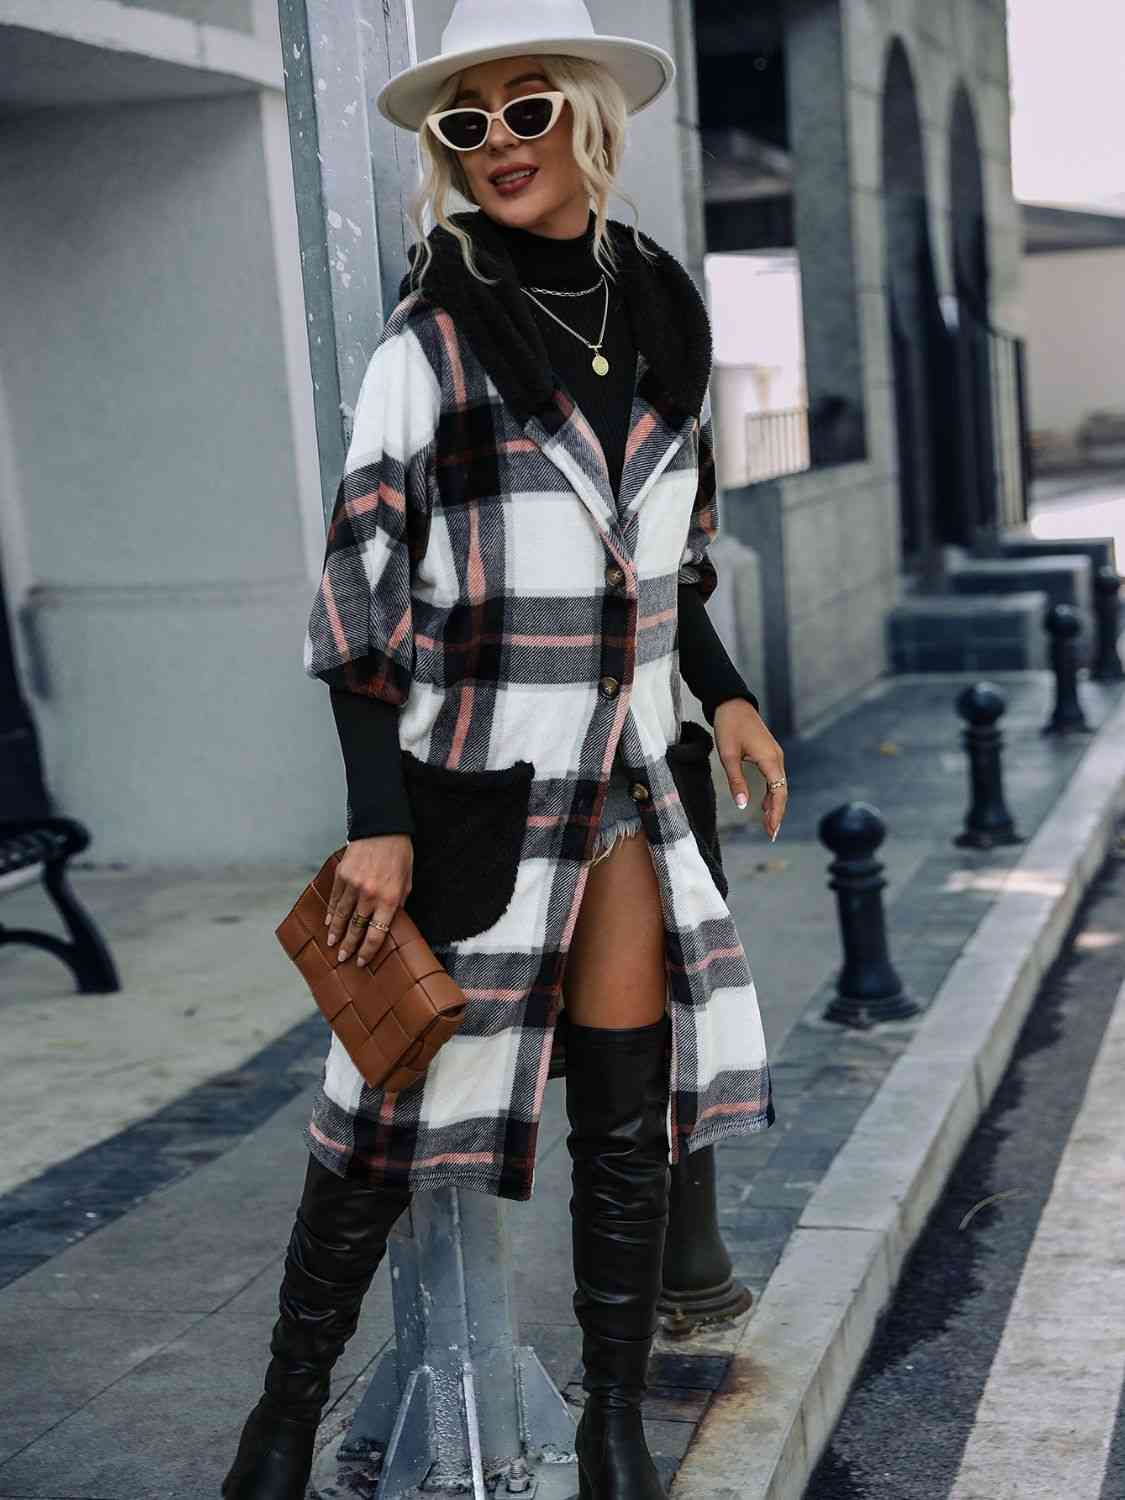 Plaid Button Down Hooded Jacket